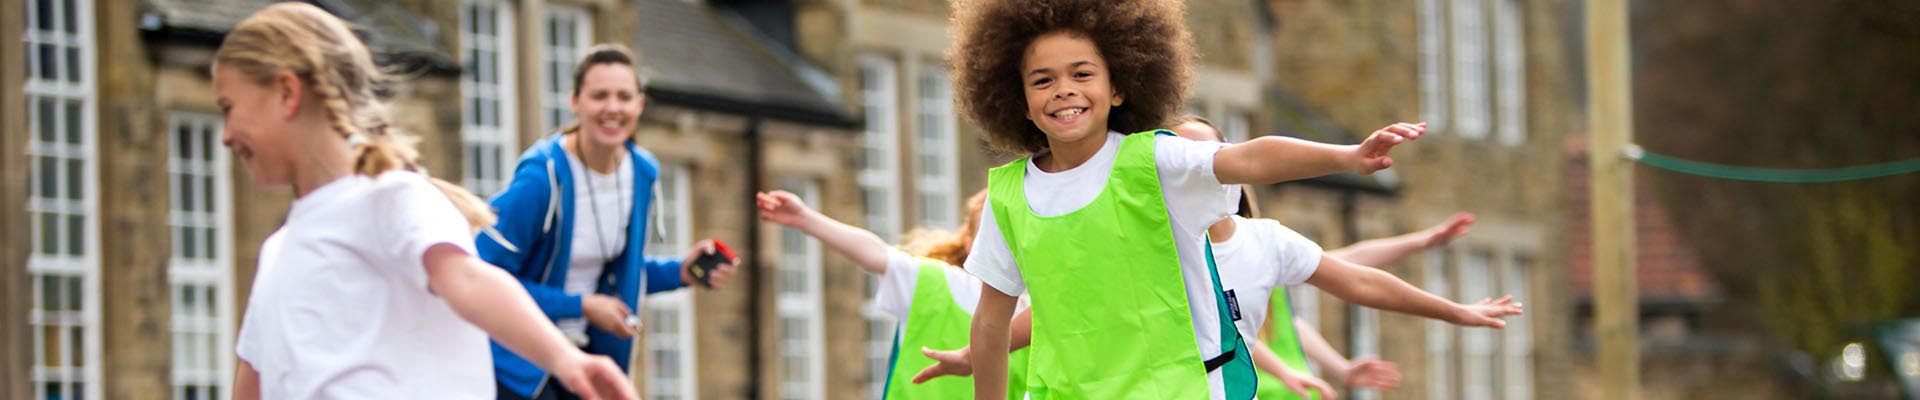 Self-directed exercise 'can aid children's capacity to learn' 